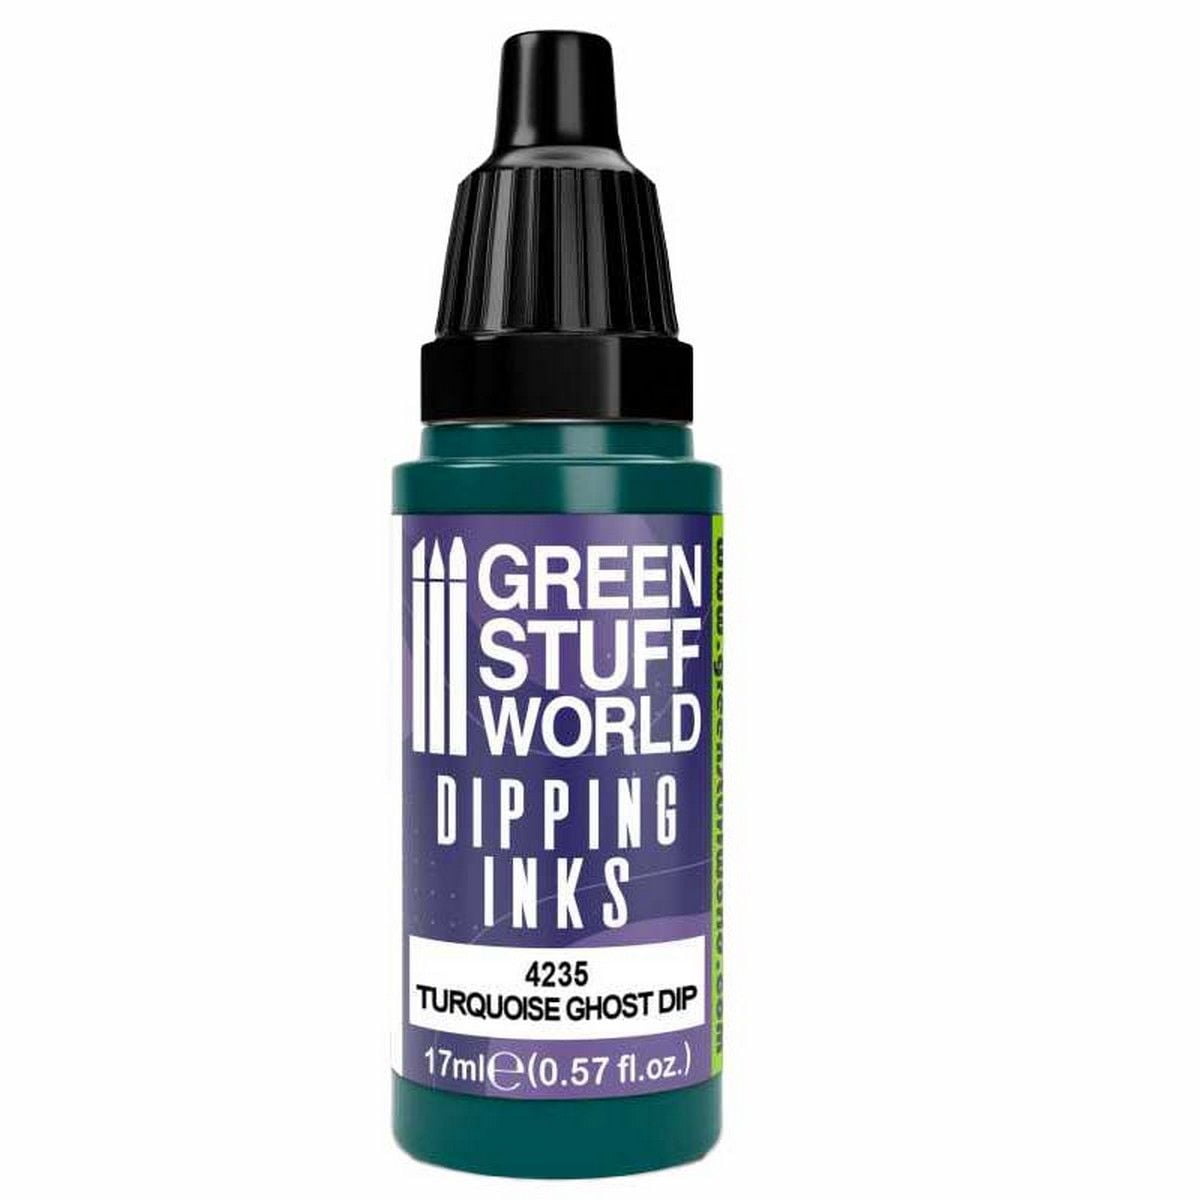 Dipping Ink 17ml - Turquoise Ghost Dip